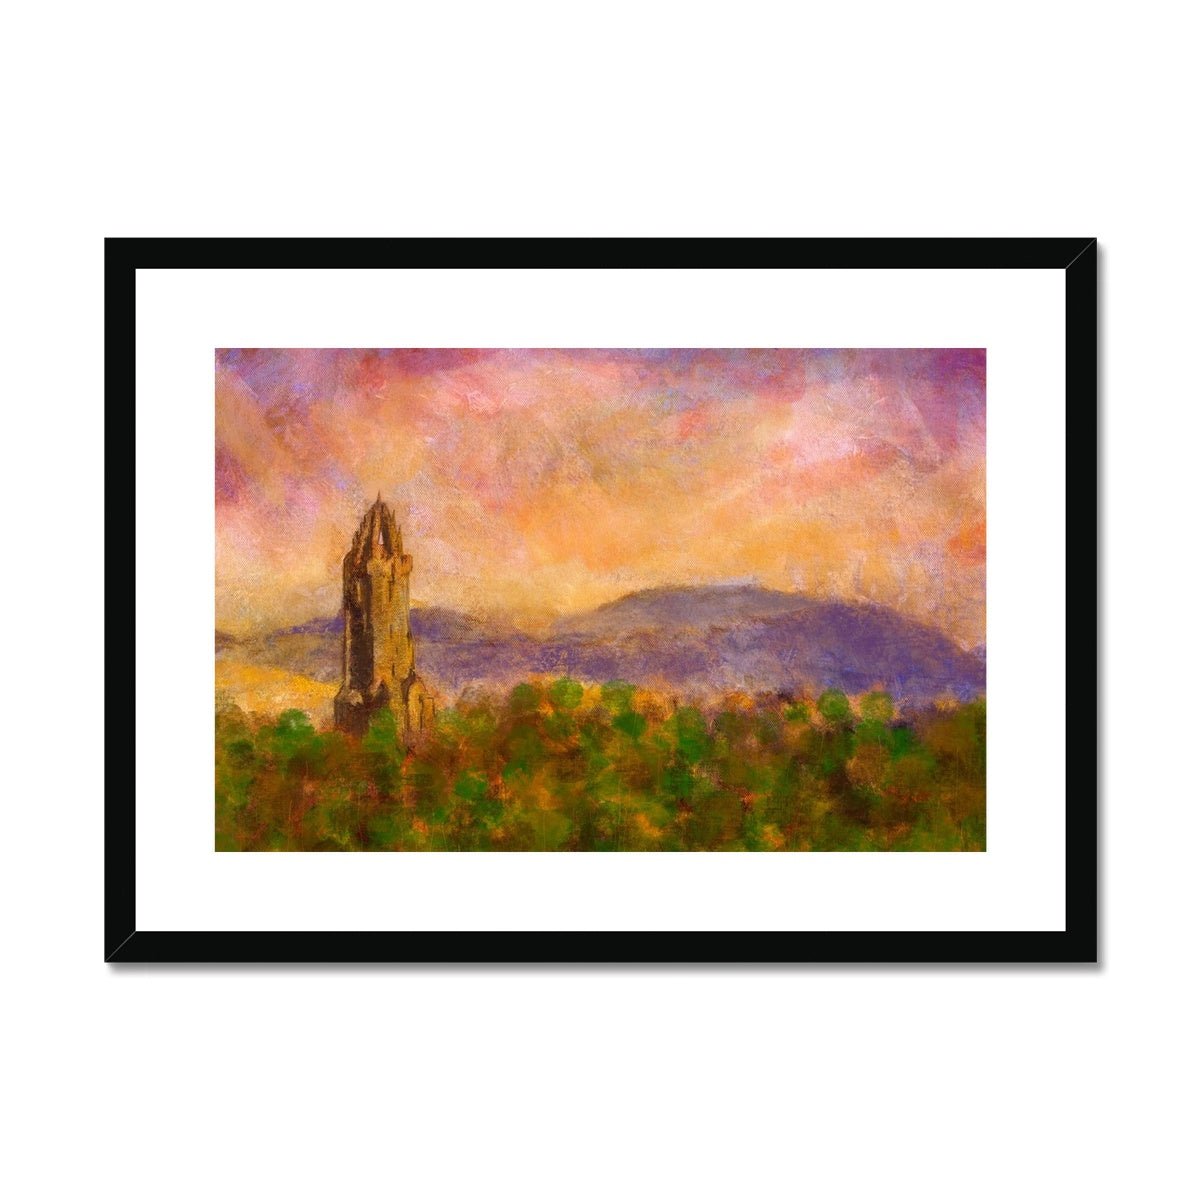 Wallace Monument Dusk Painting | Framed & Mounted Prints From Scotland-Framed & Mounted Prints-Historic & Iconic Scotland Art Gallery-A2 Landscape-Black Frame-Paintings, Prints, Homeware, Art Gifts From Scotland By Scottish Artist Kevin Hunter